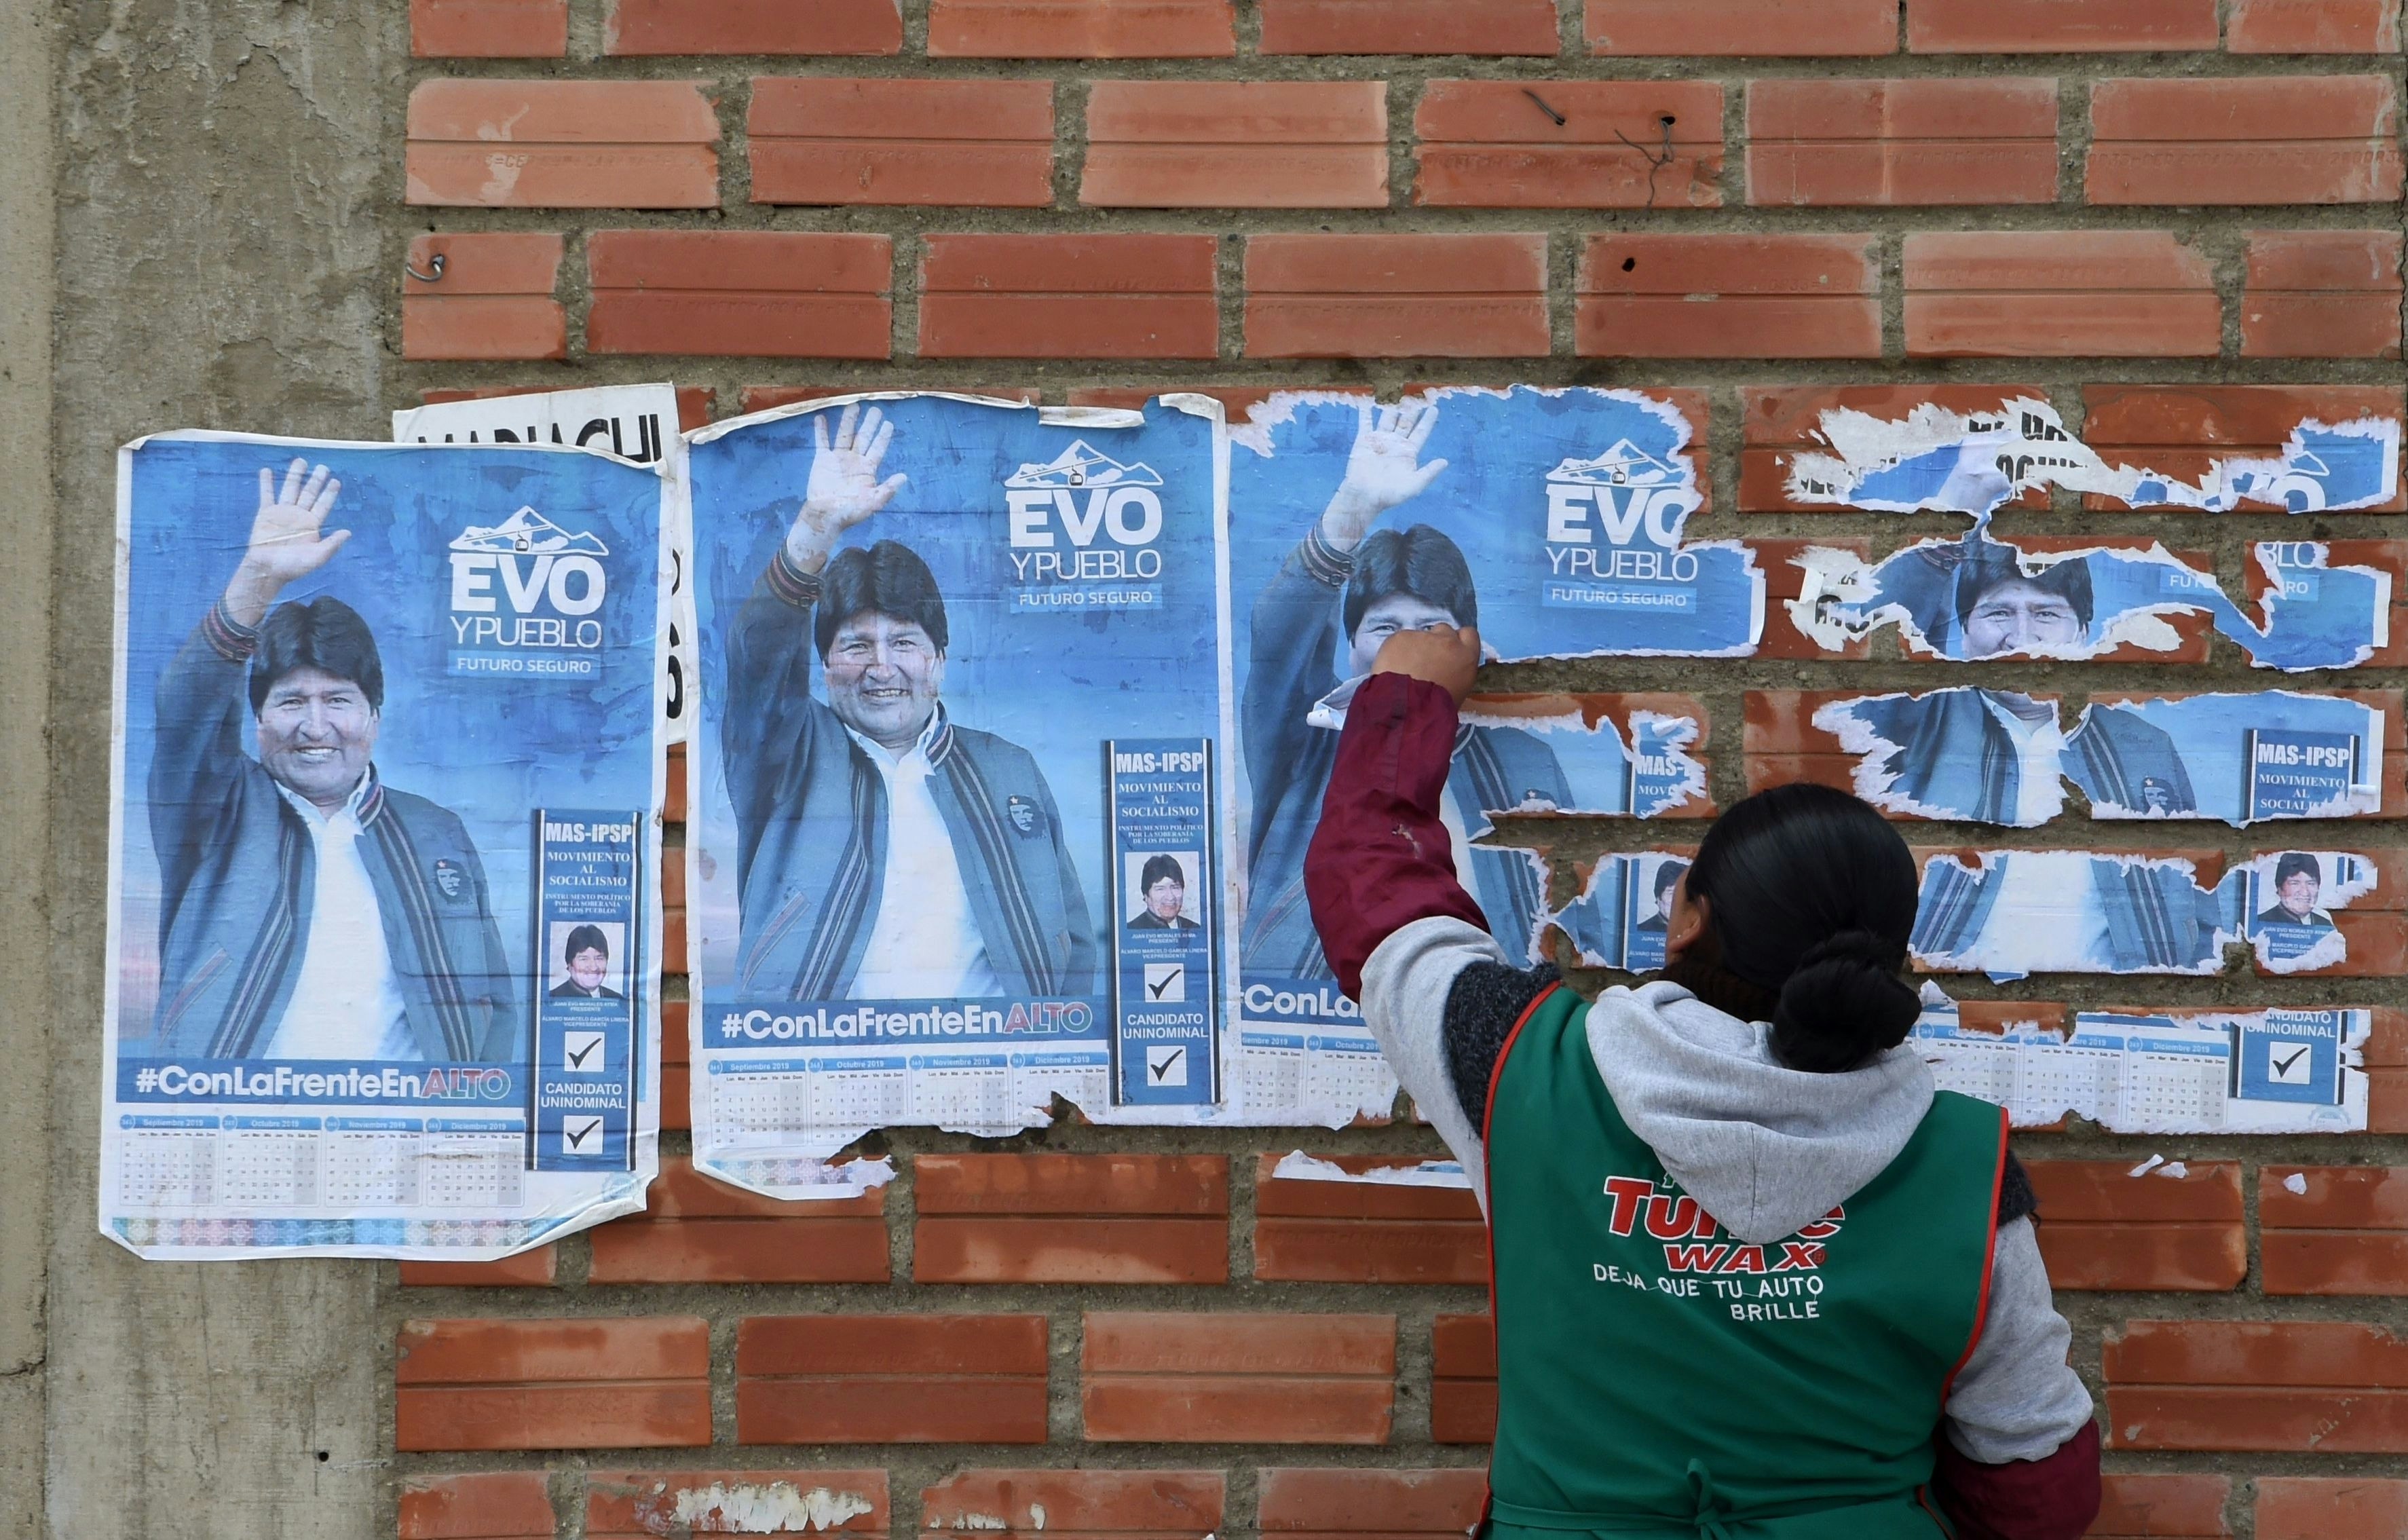 A woman peels posters of former Bolivian president Evo Morales off of a red brick wall. 